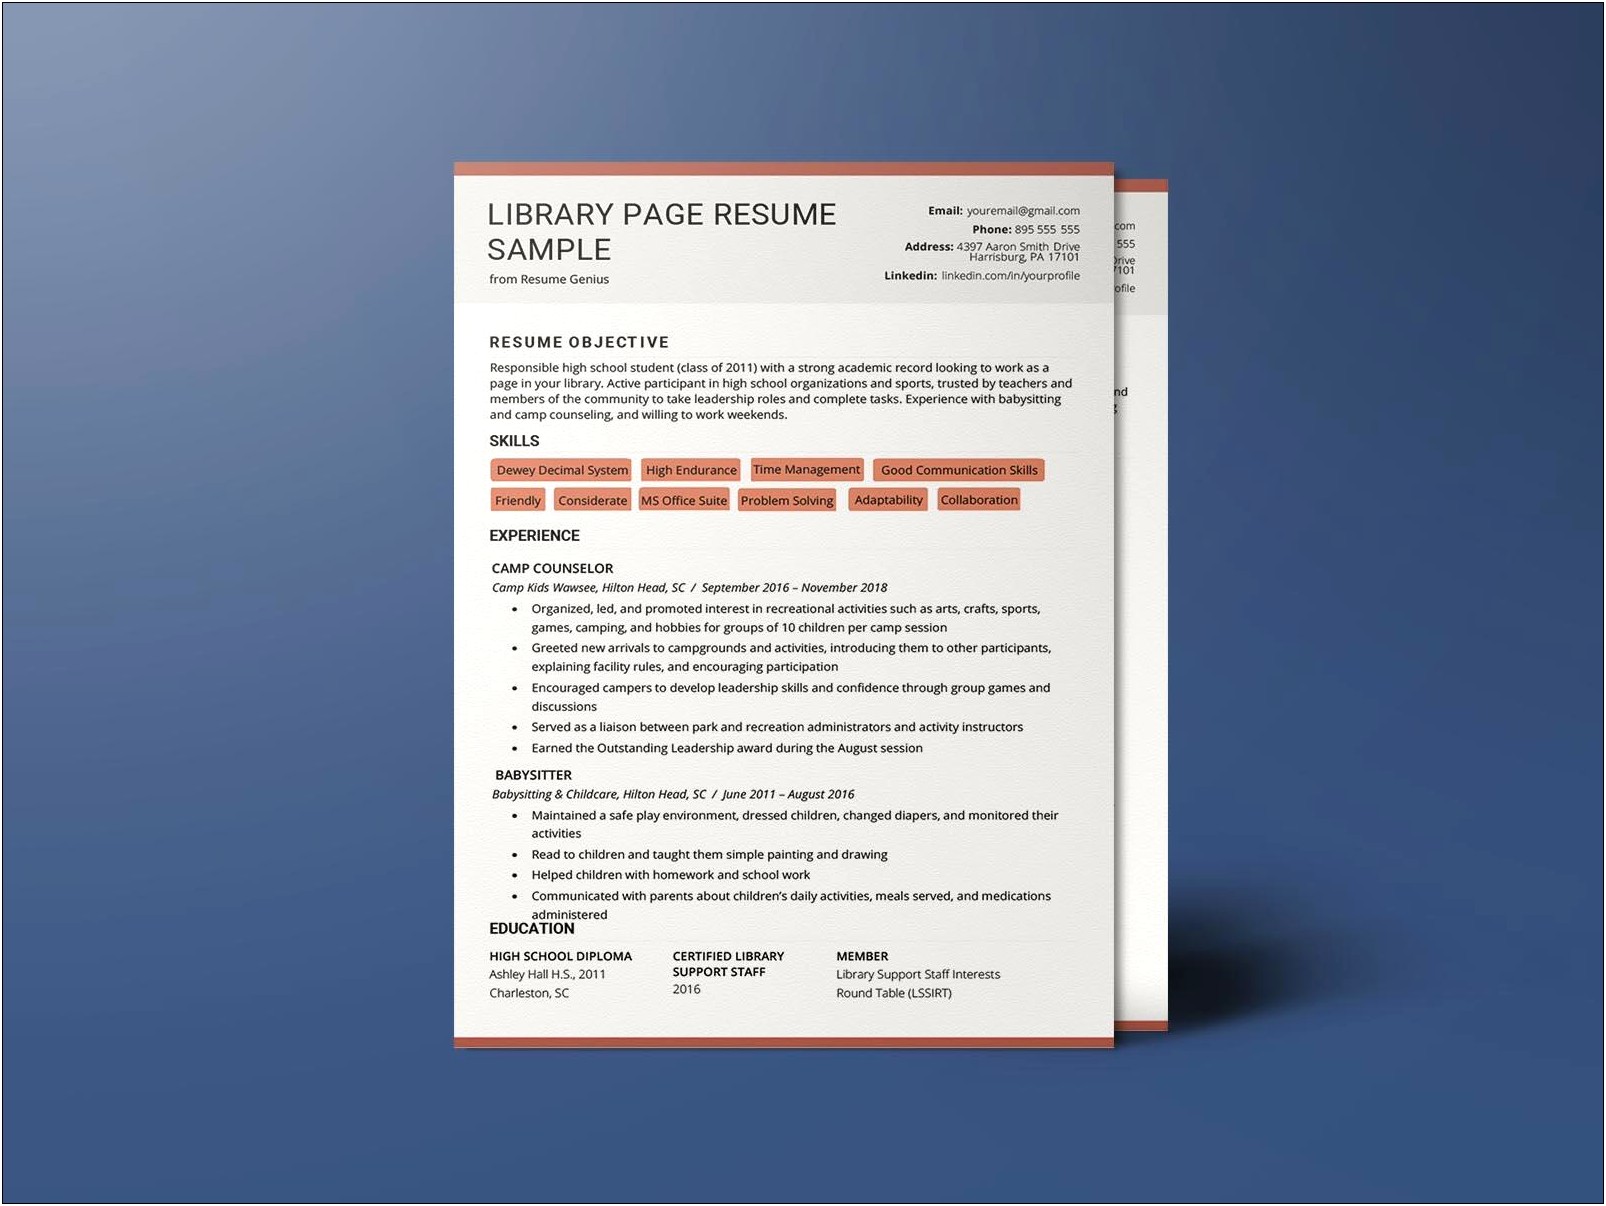 Resume Objective For Working In A Library